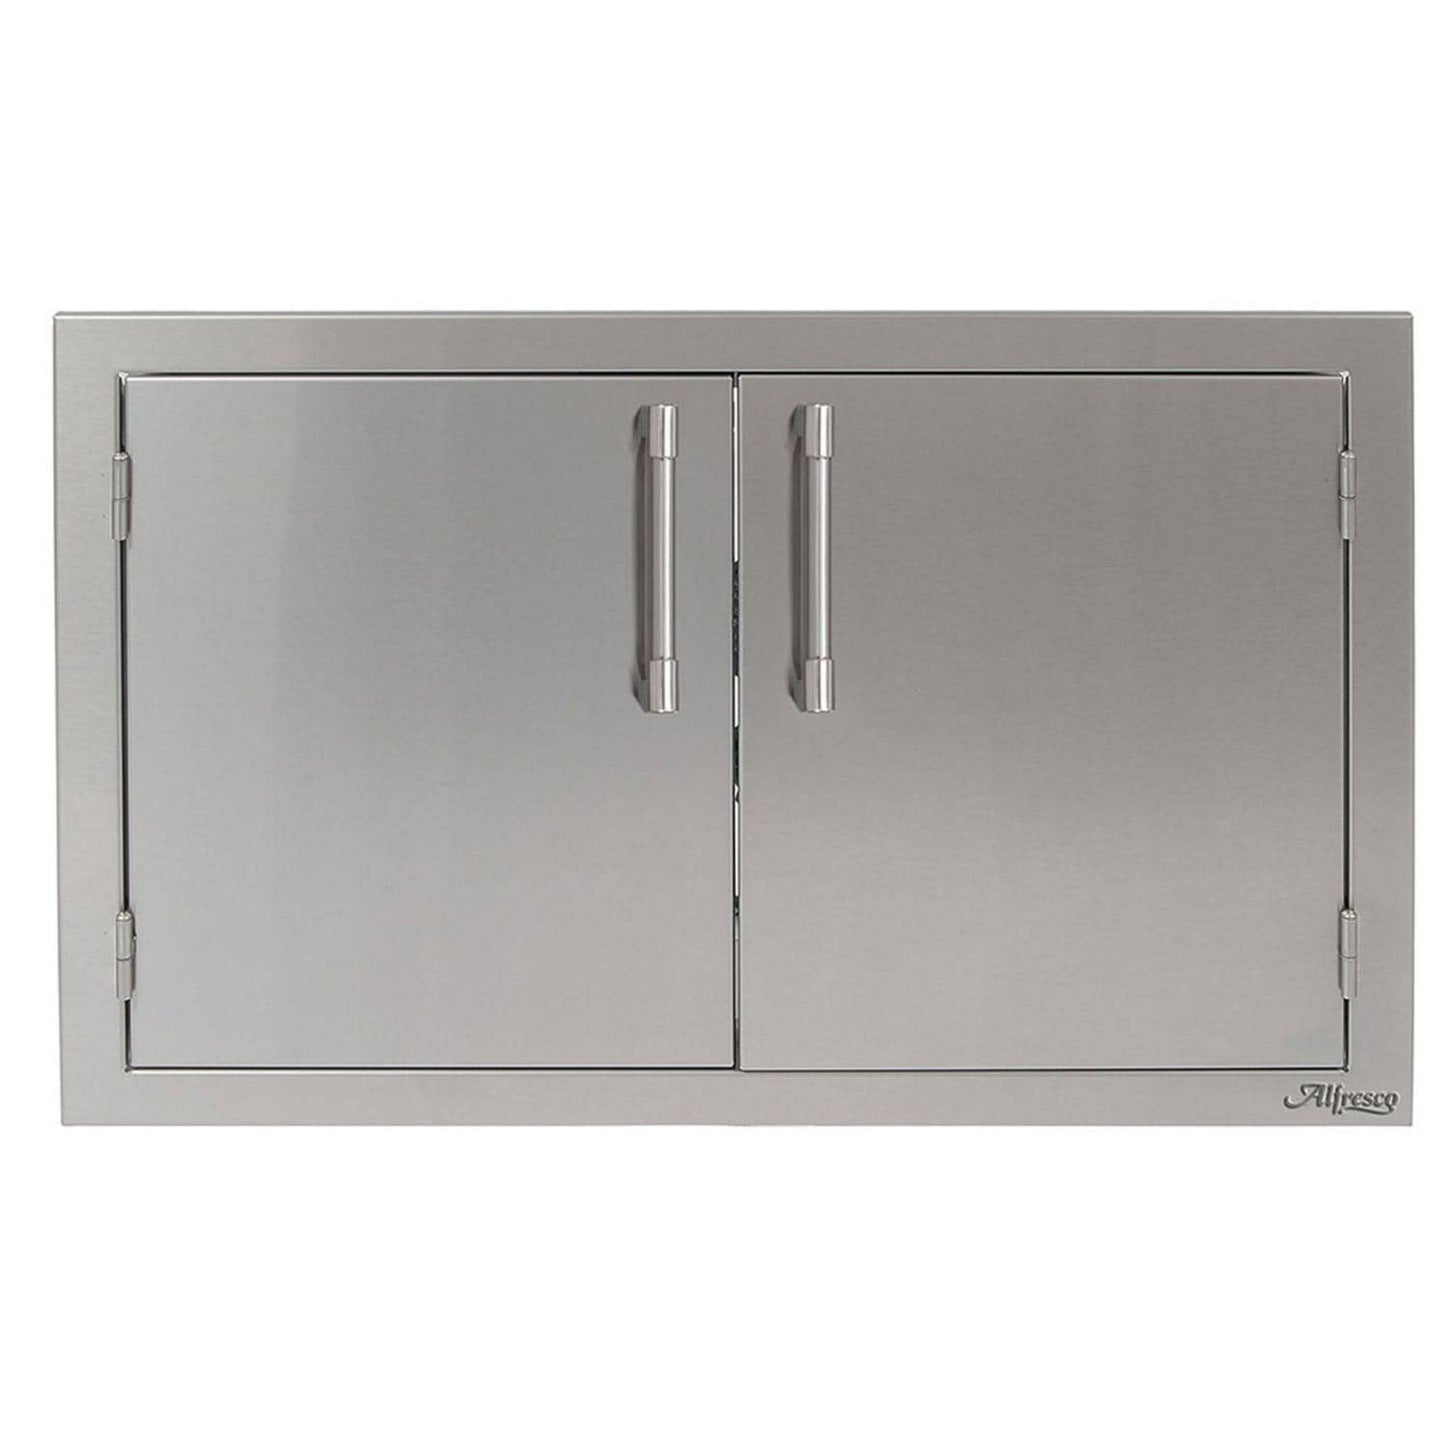 Alfresco 42" Signal White Matte Stainless Steel Double Access Doors